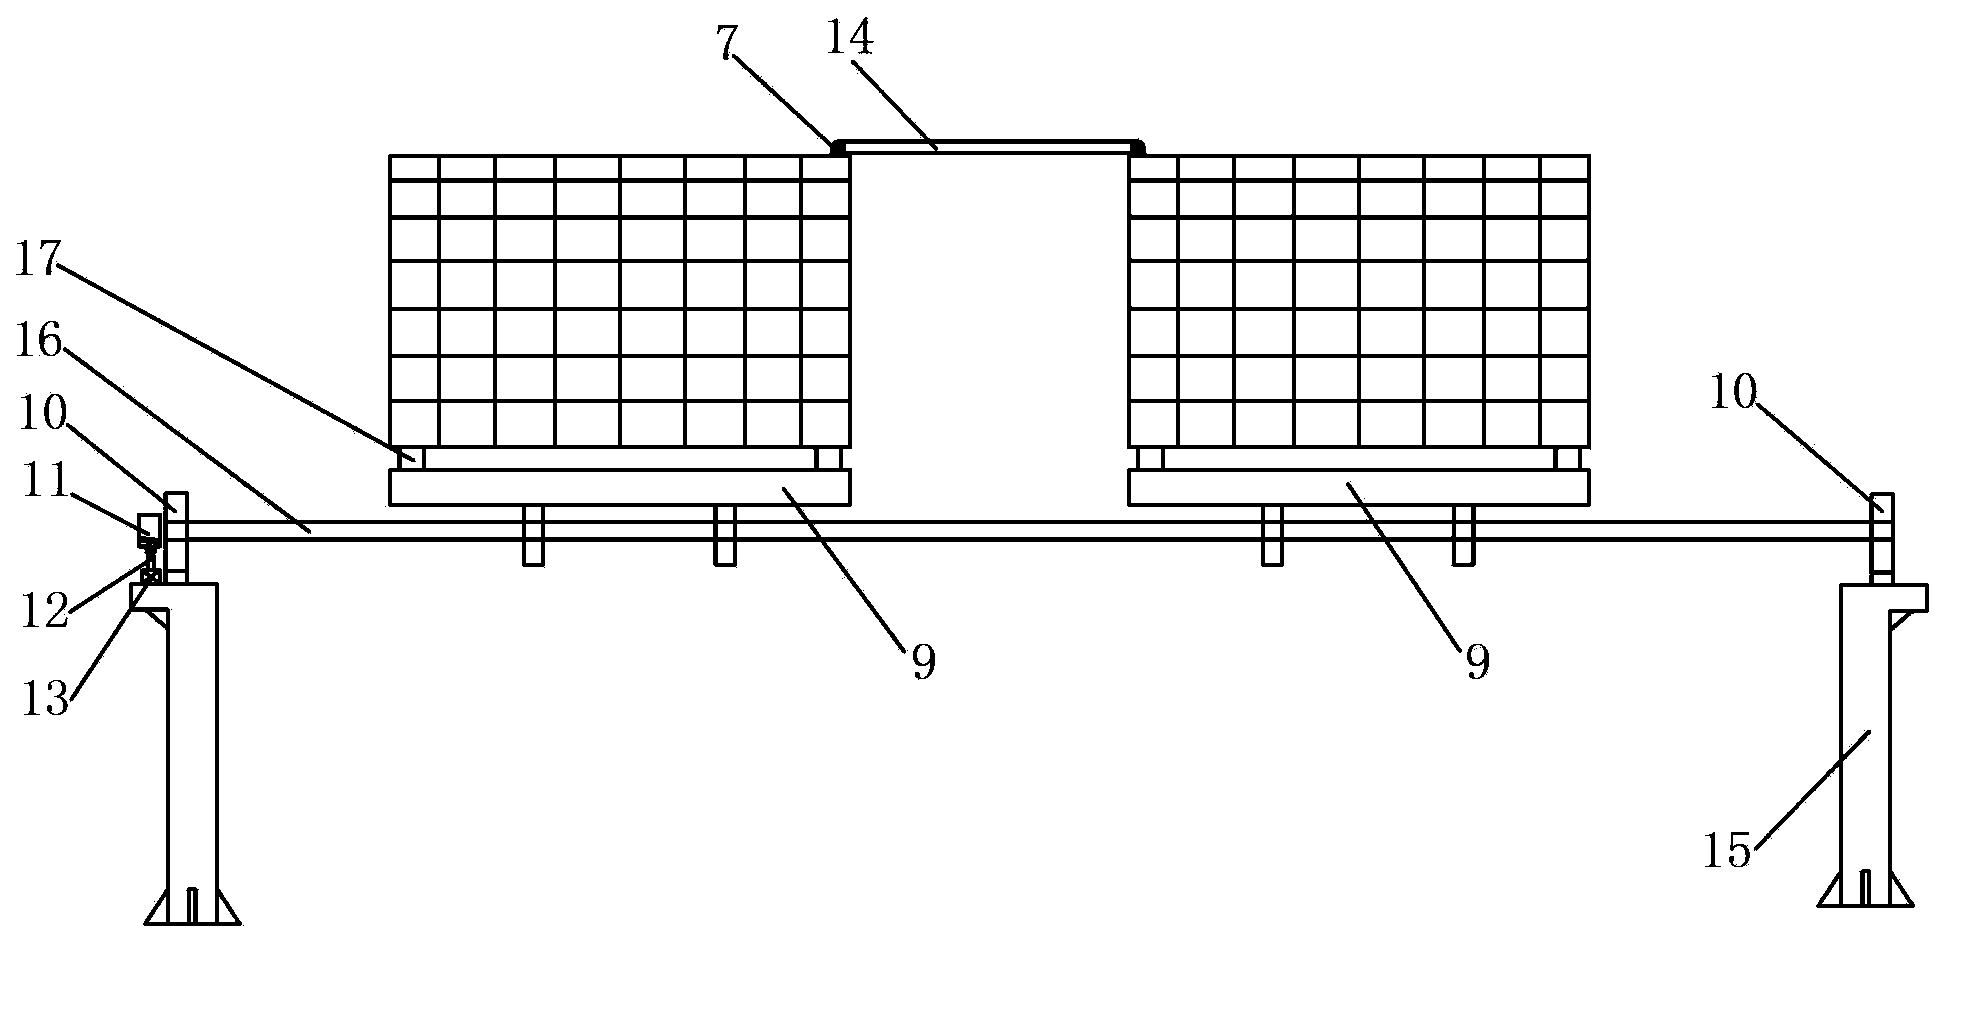 Pitch angle regulating mechanism group of solar tracking device based on rotation of earth